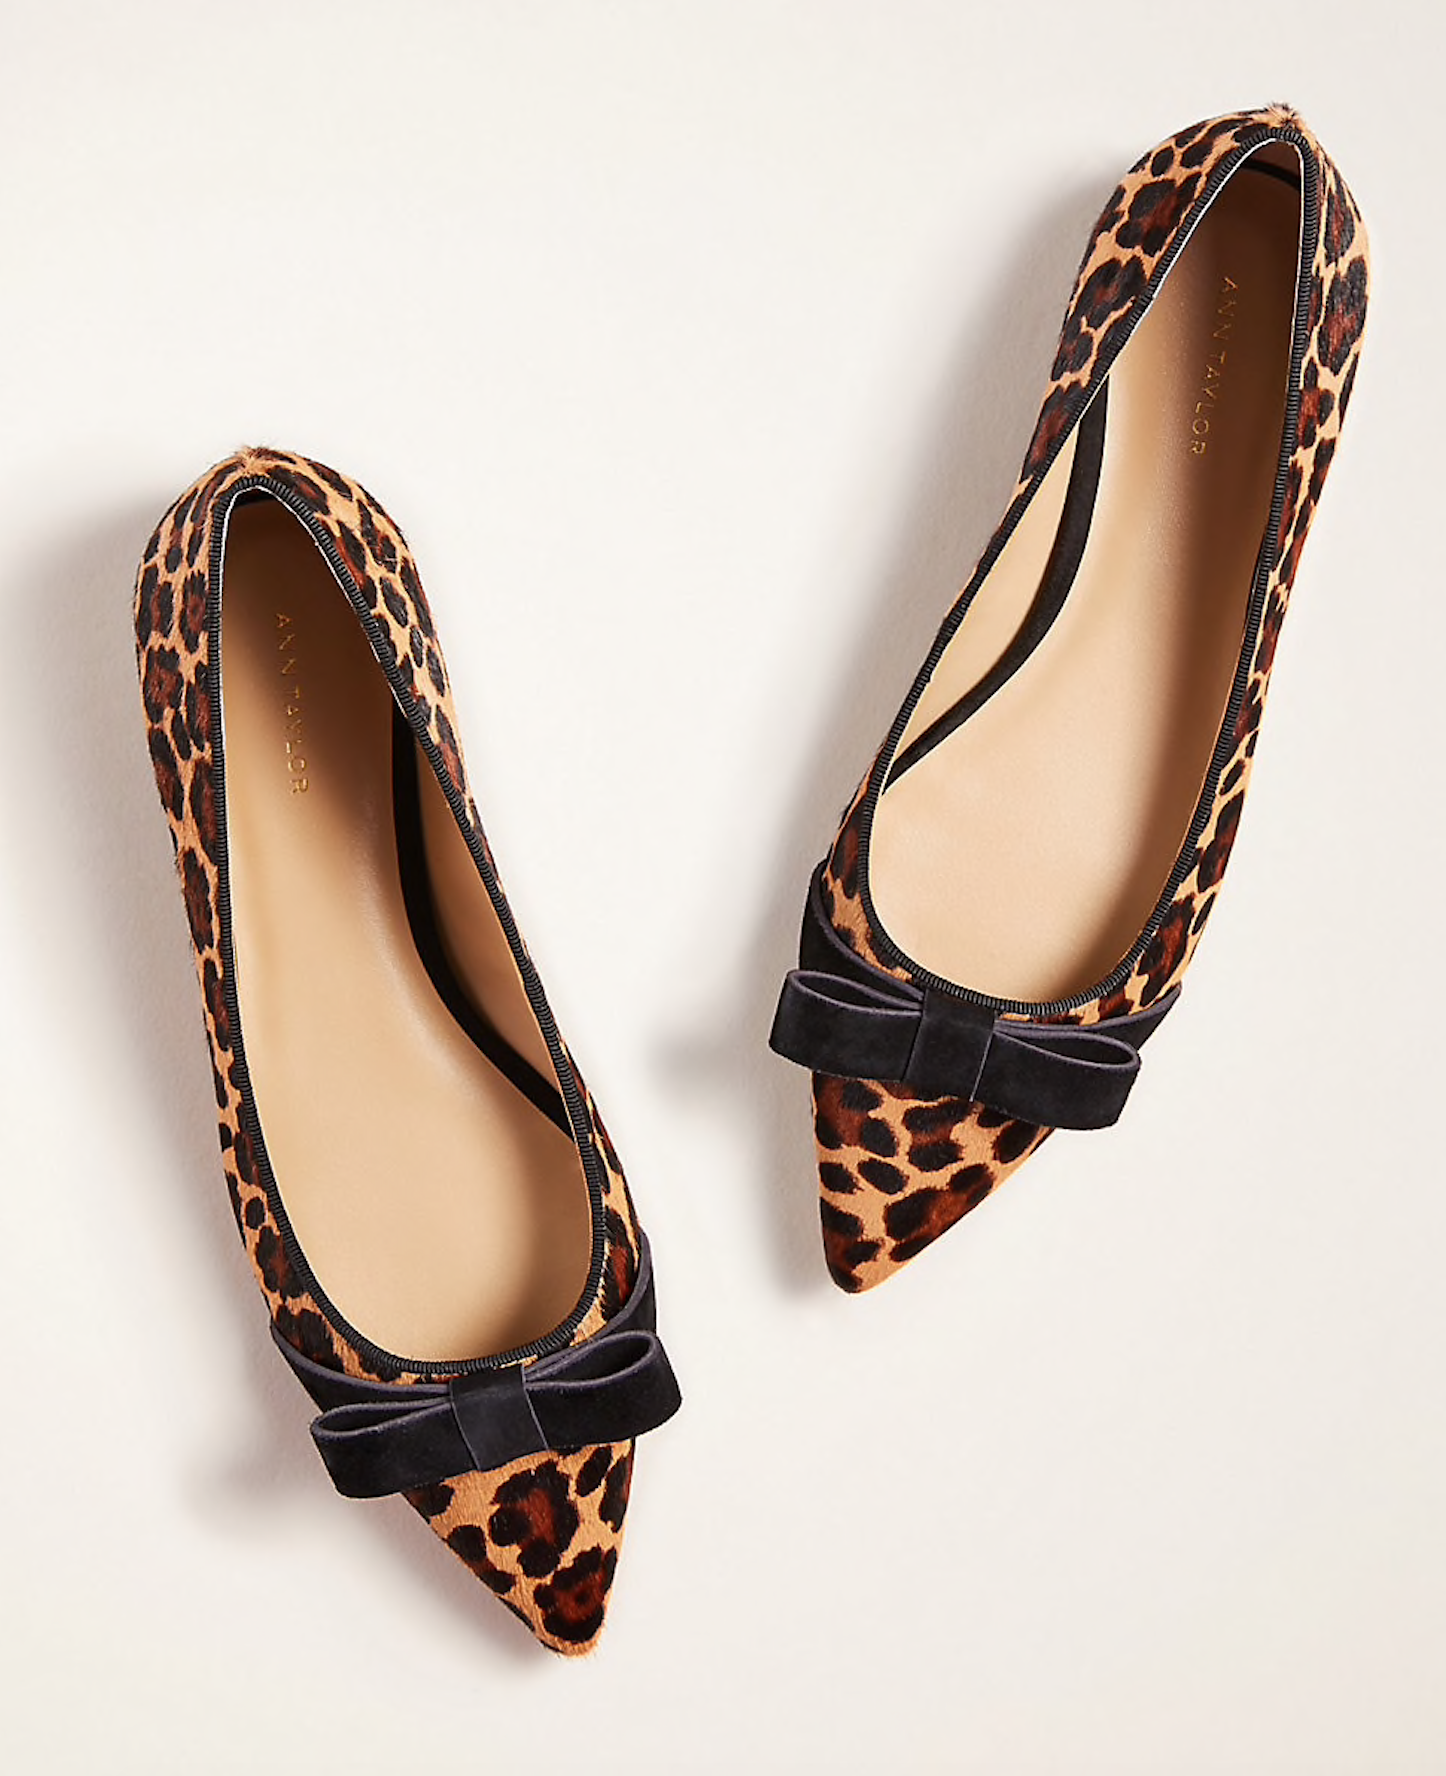 Leopard Print Pointed Toe Flats